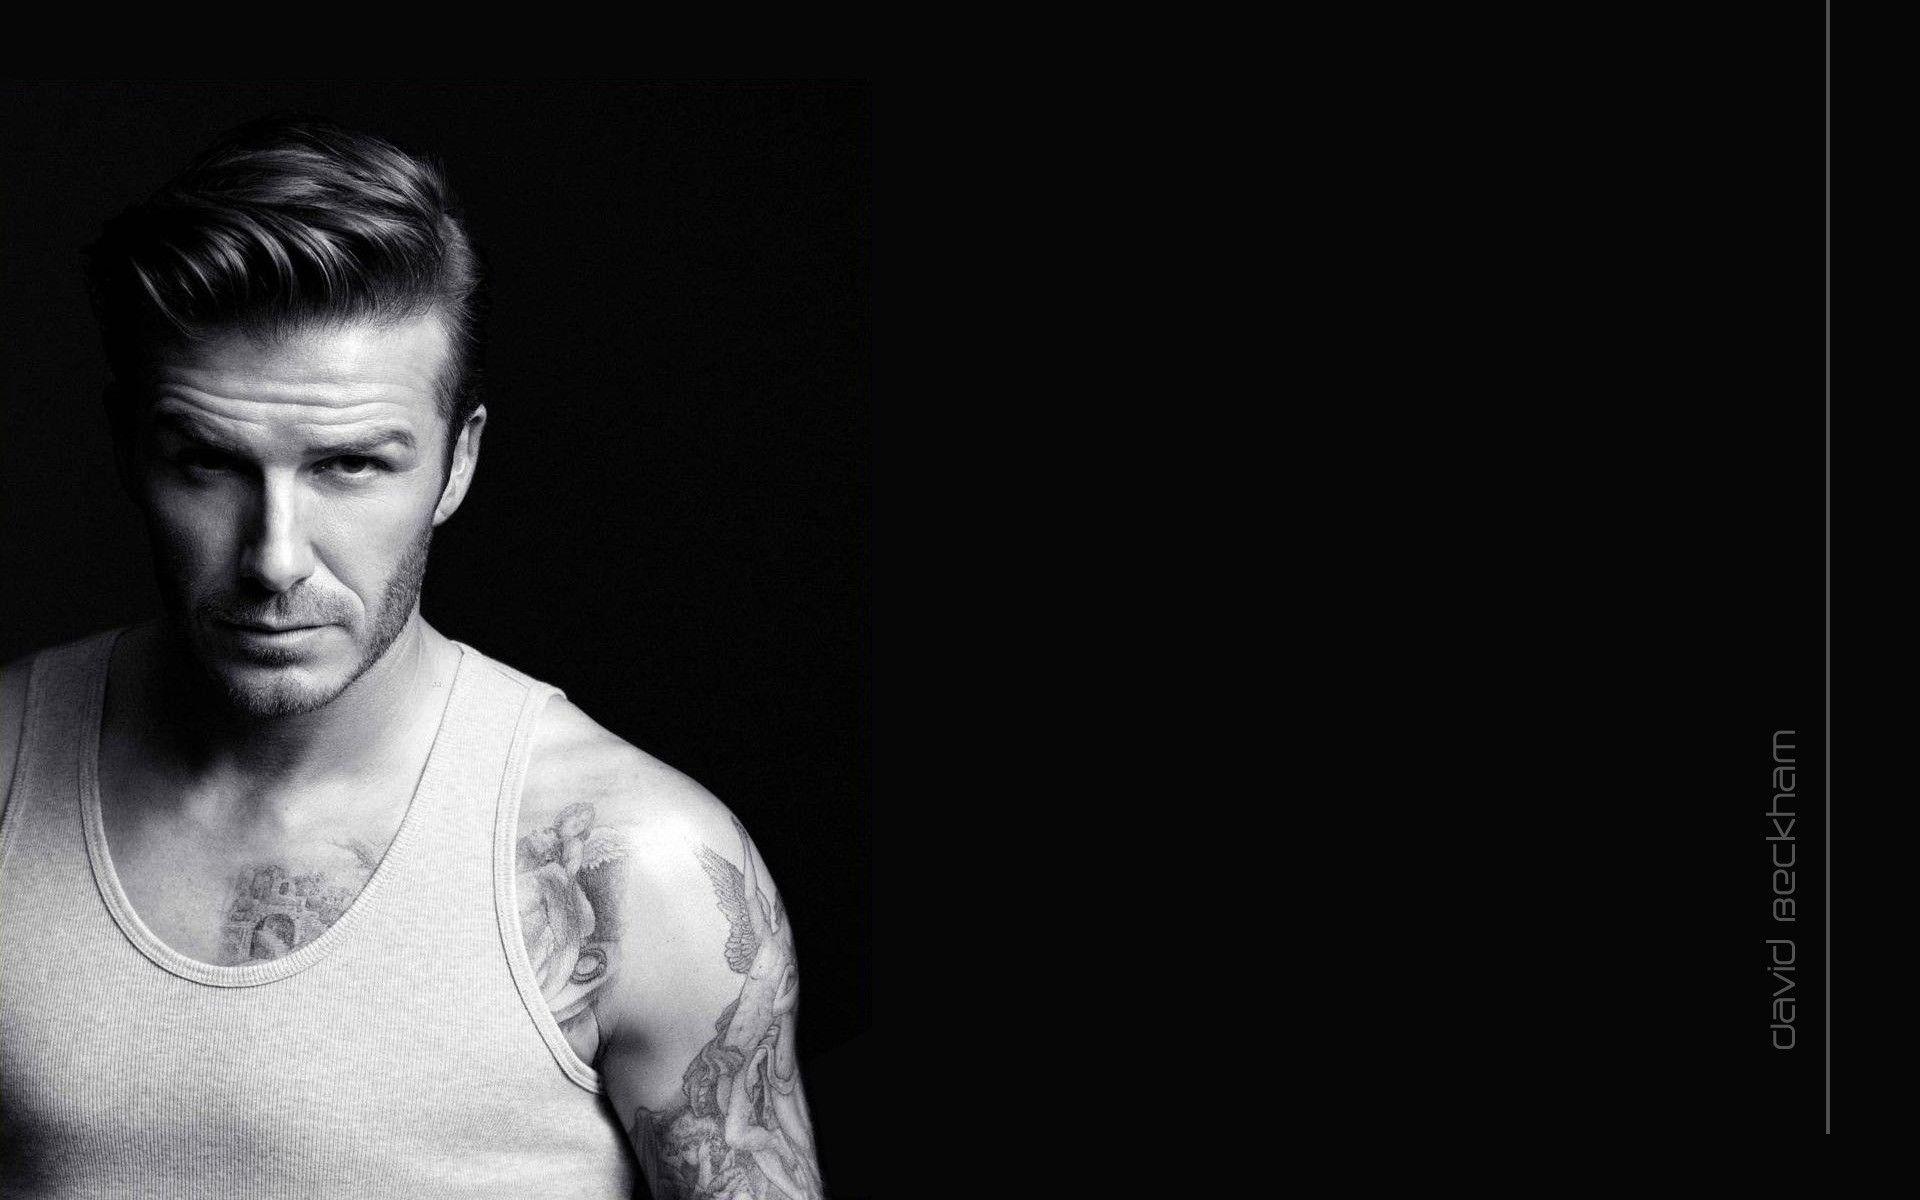 Wallpapers Hd Of Backgrounds David Beckham High Resolution And